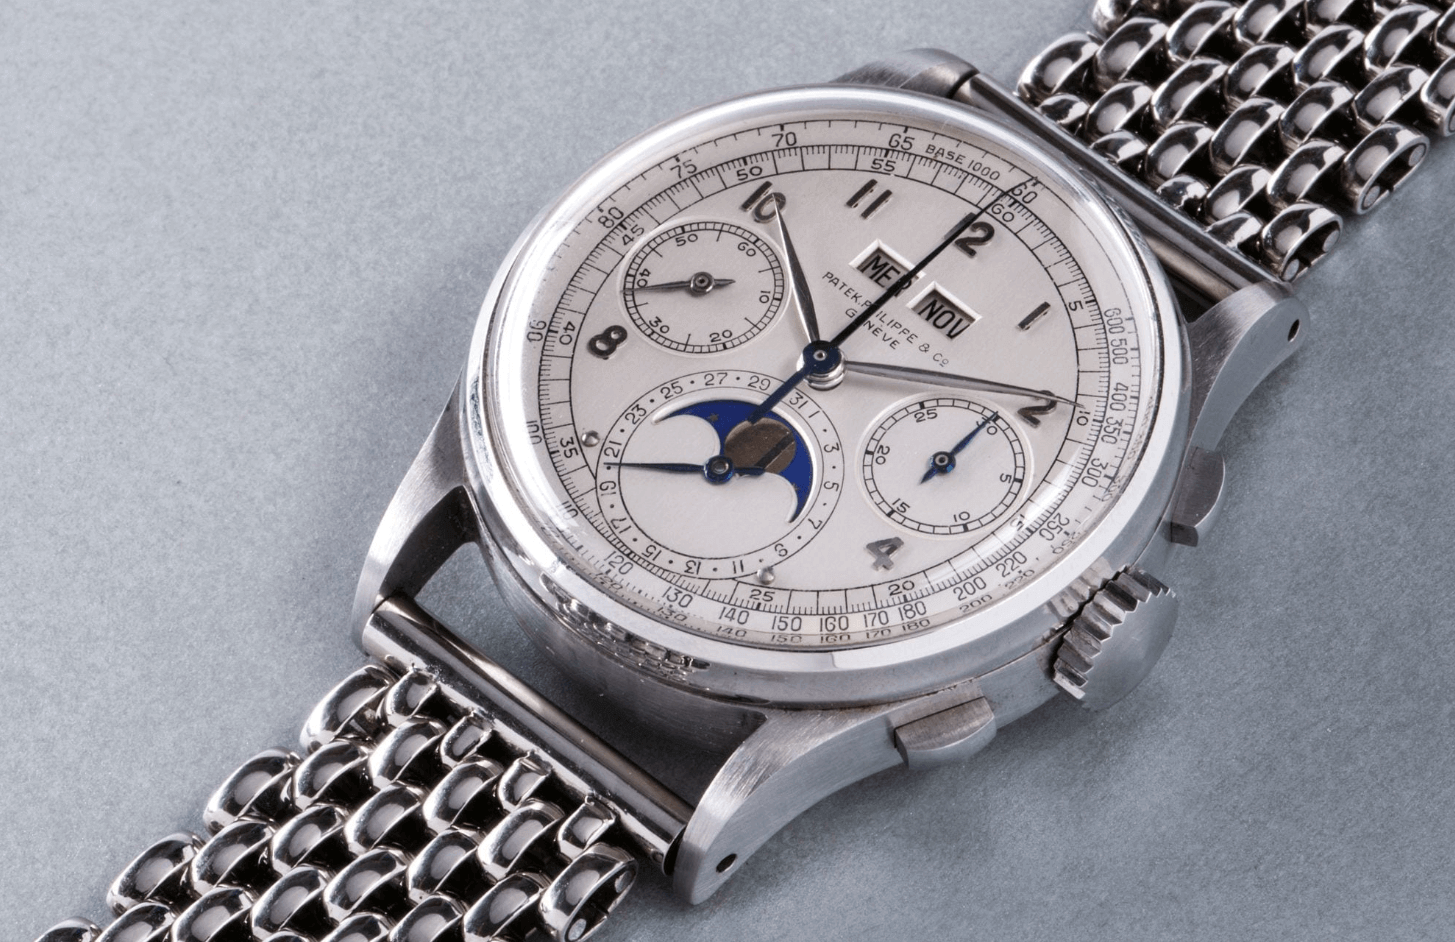 The Patek Philippe Stainless Steel Ref. 1518/Photo from the Phillip